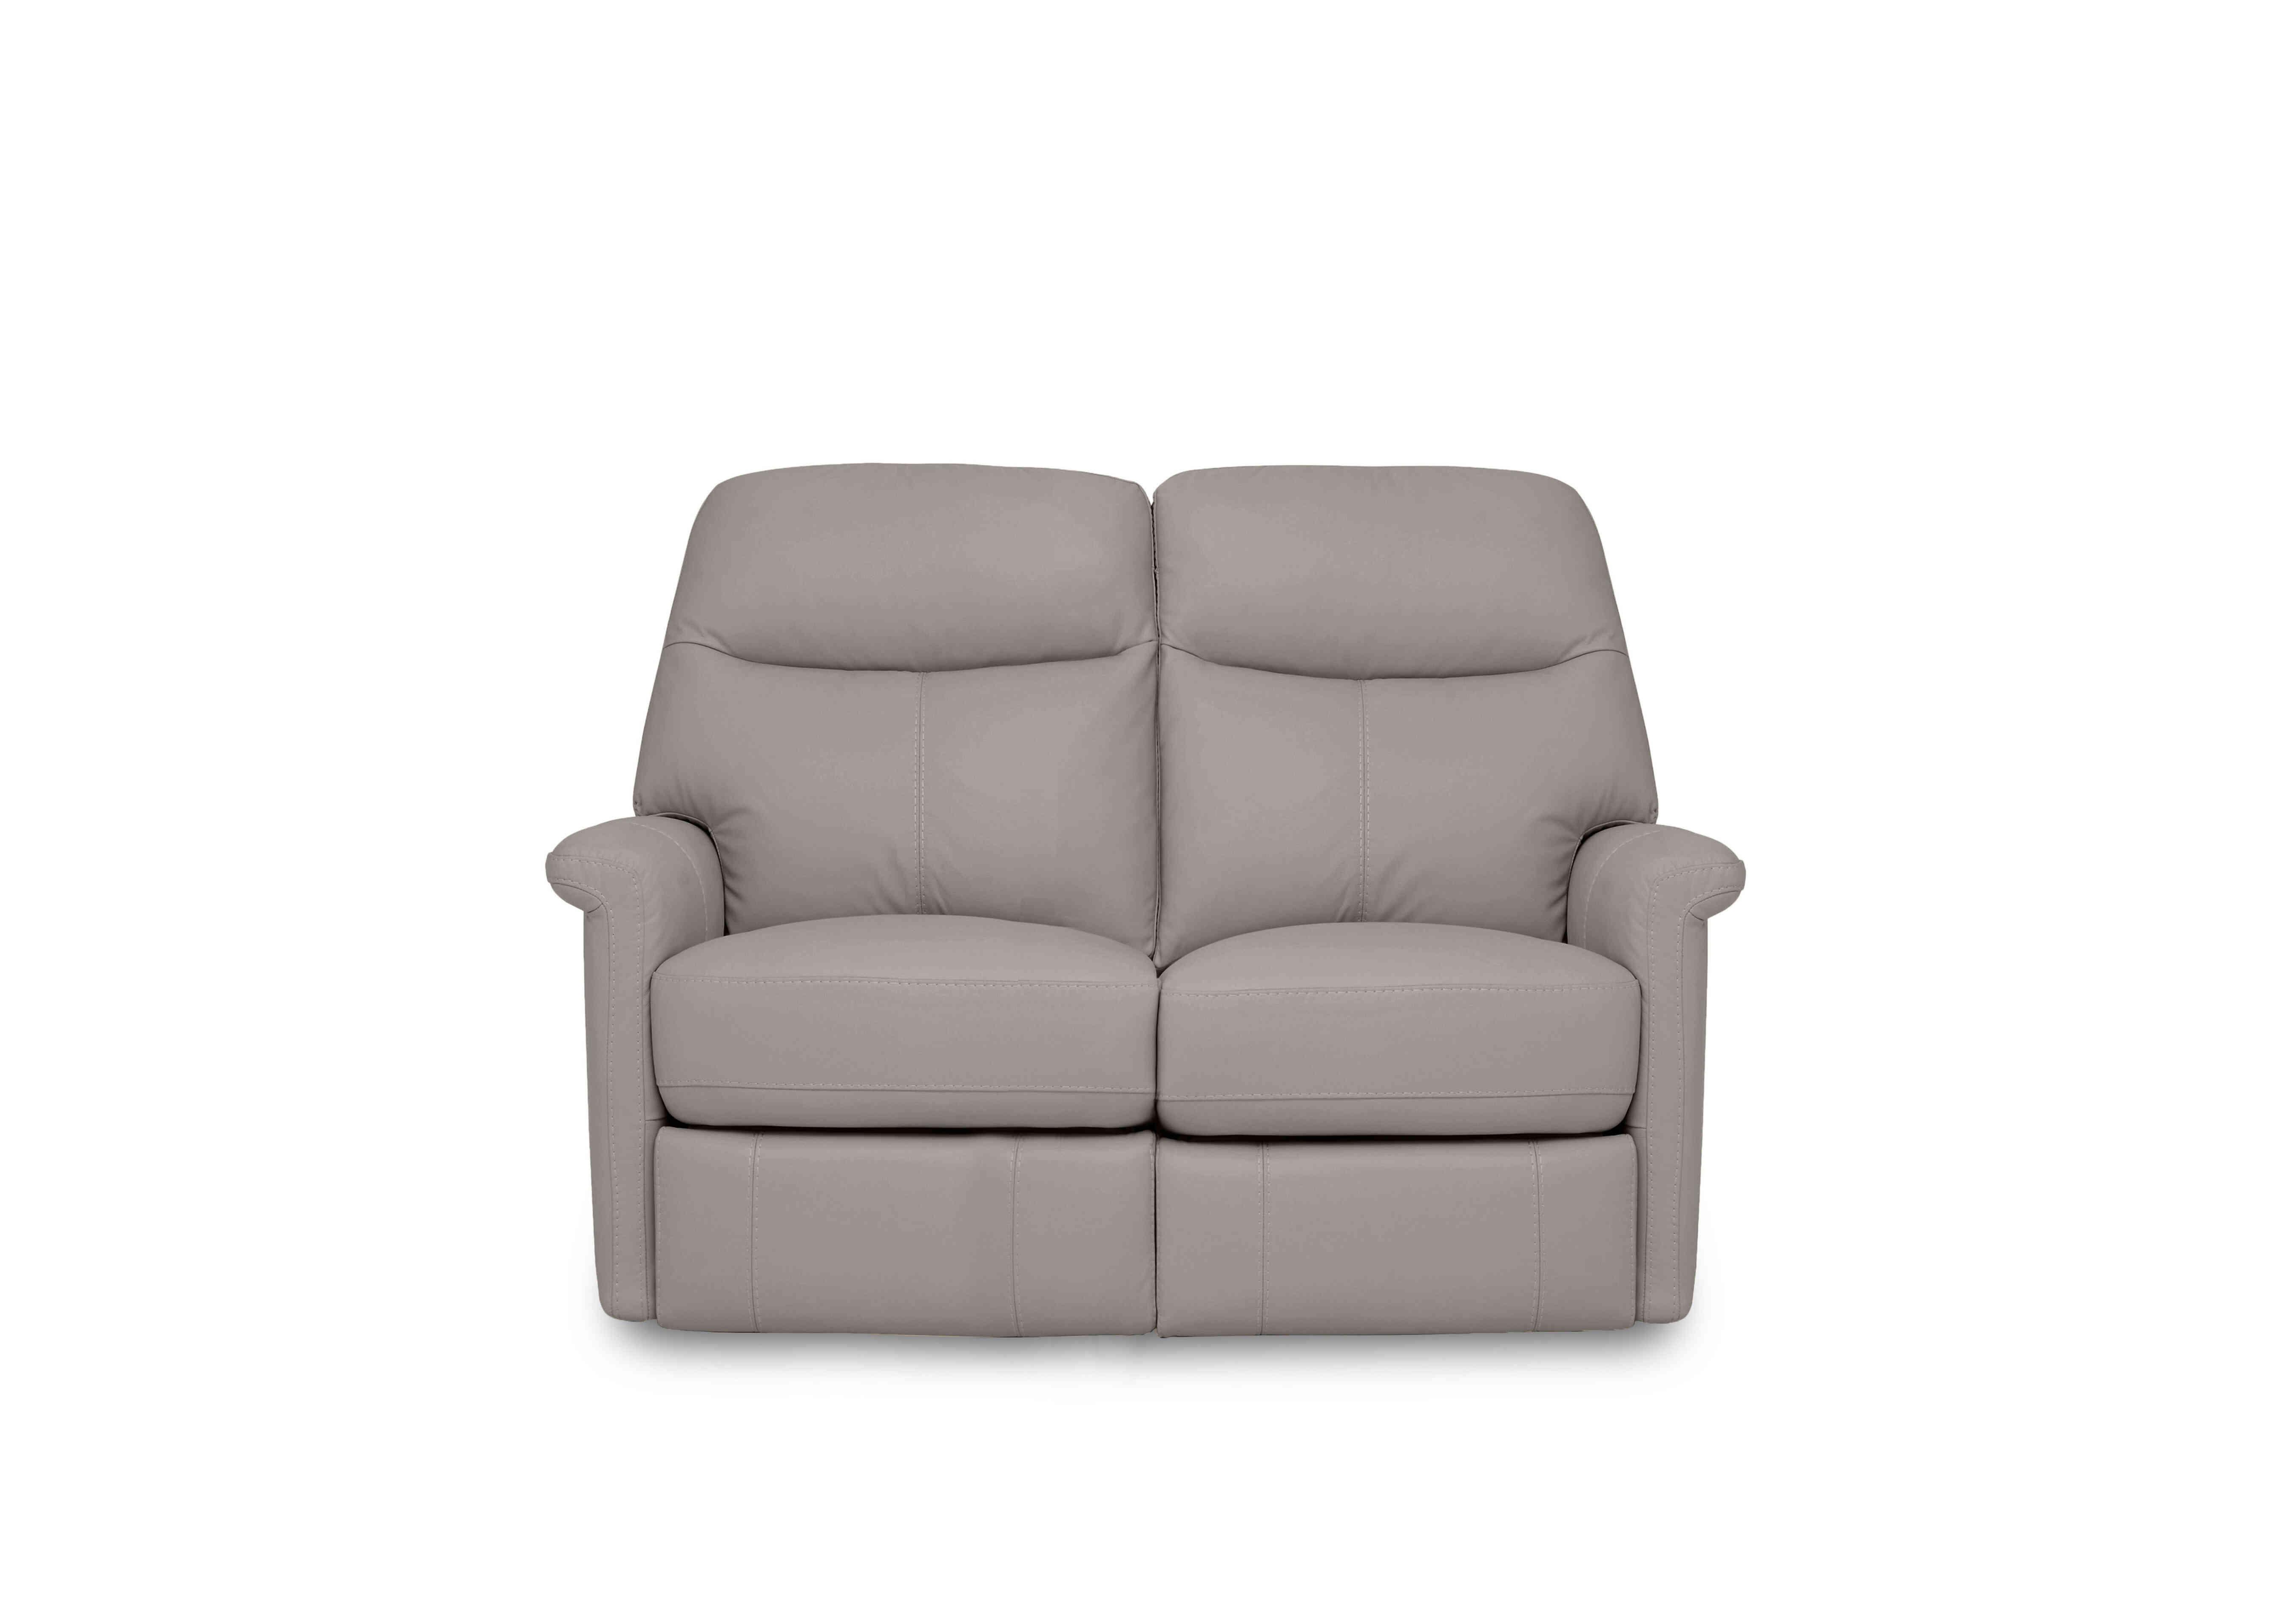 Compact Collection Lille 2 Seater Leather Sofa in Bv-946b Silver Grey on Furniture Village